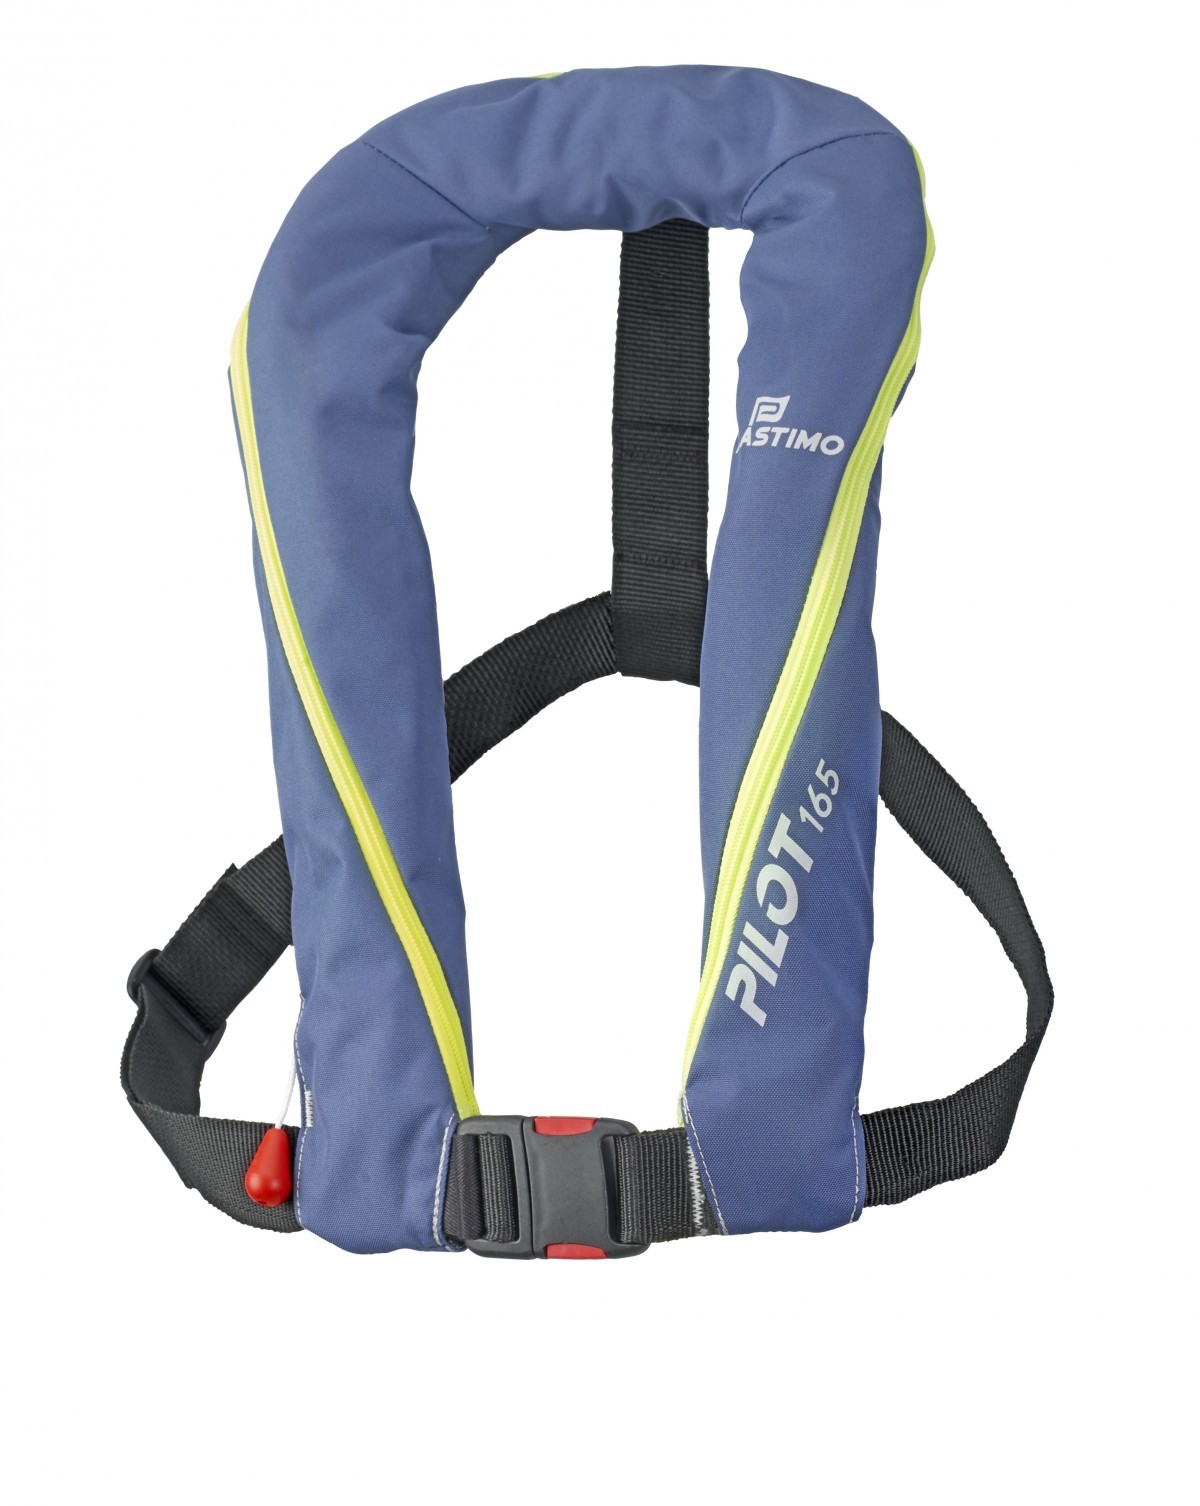 New pilot 165 inflatable lifejacket without harness